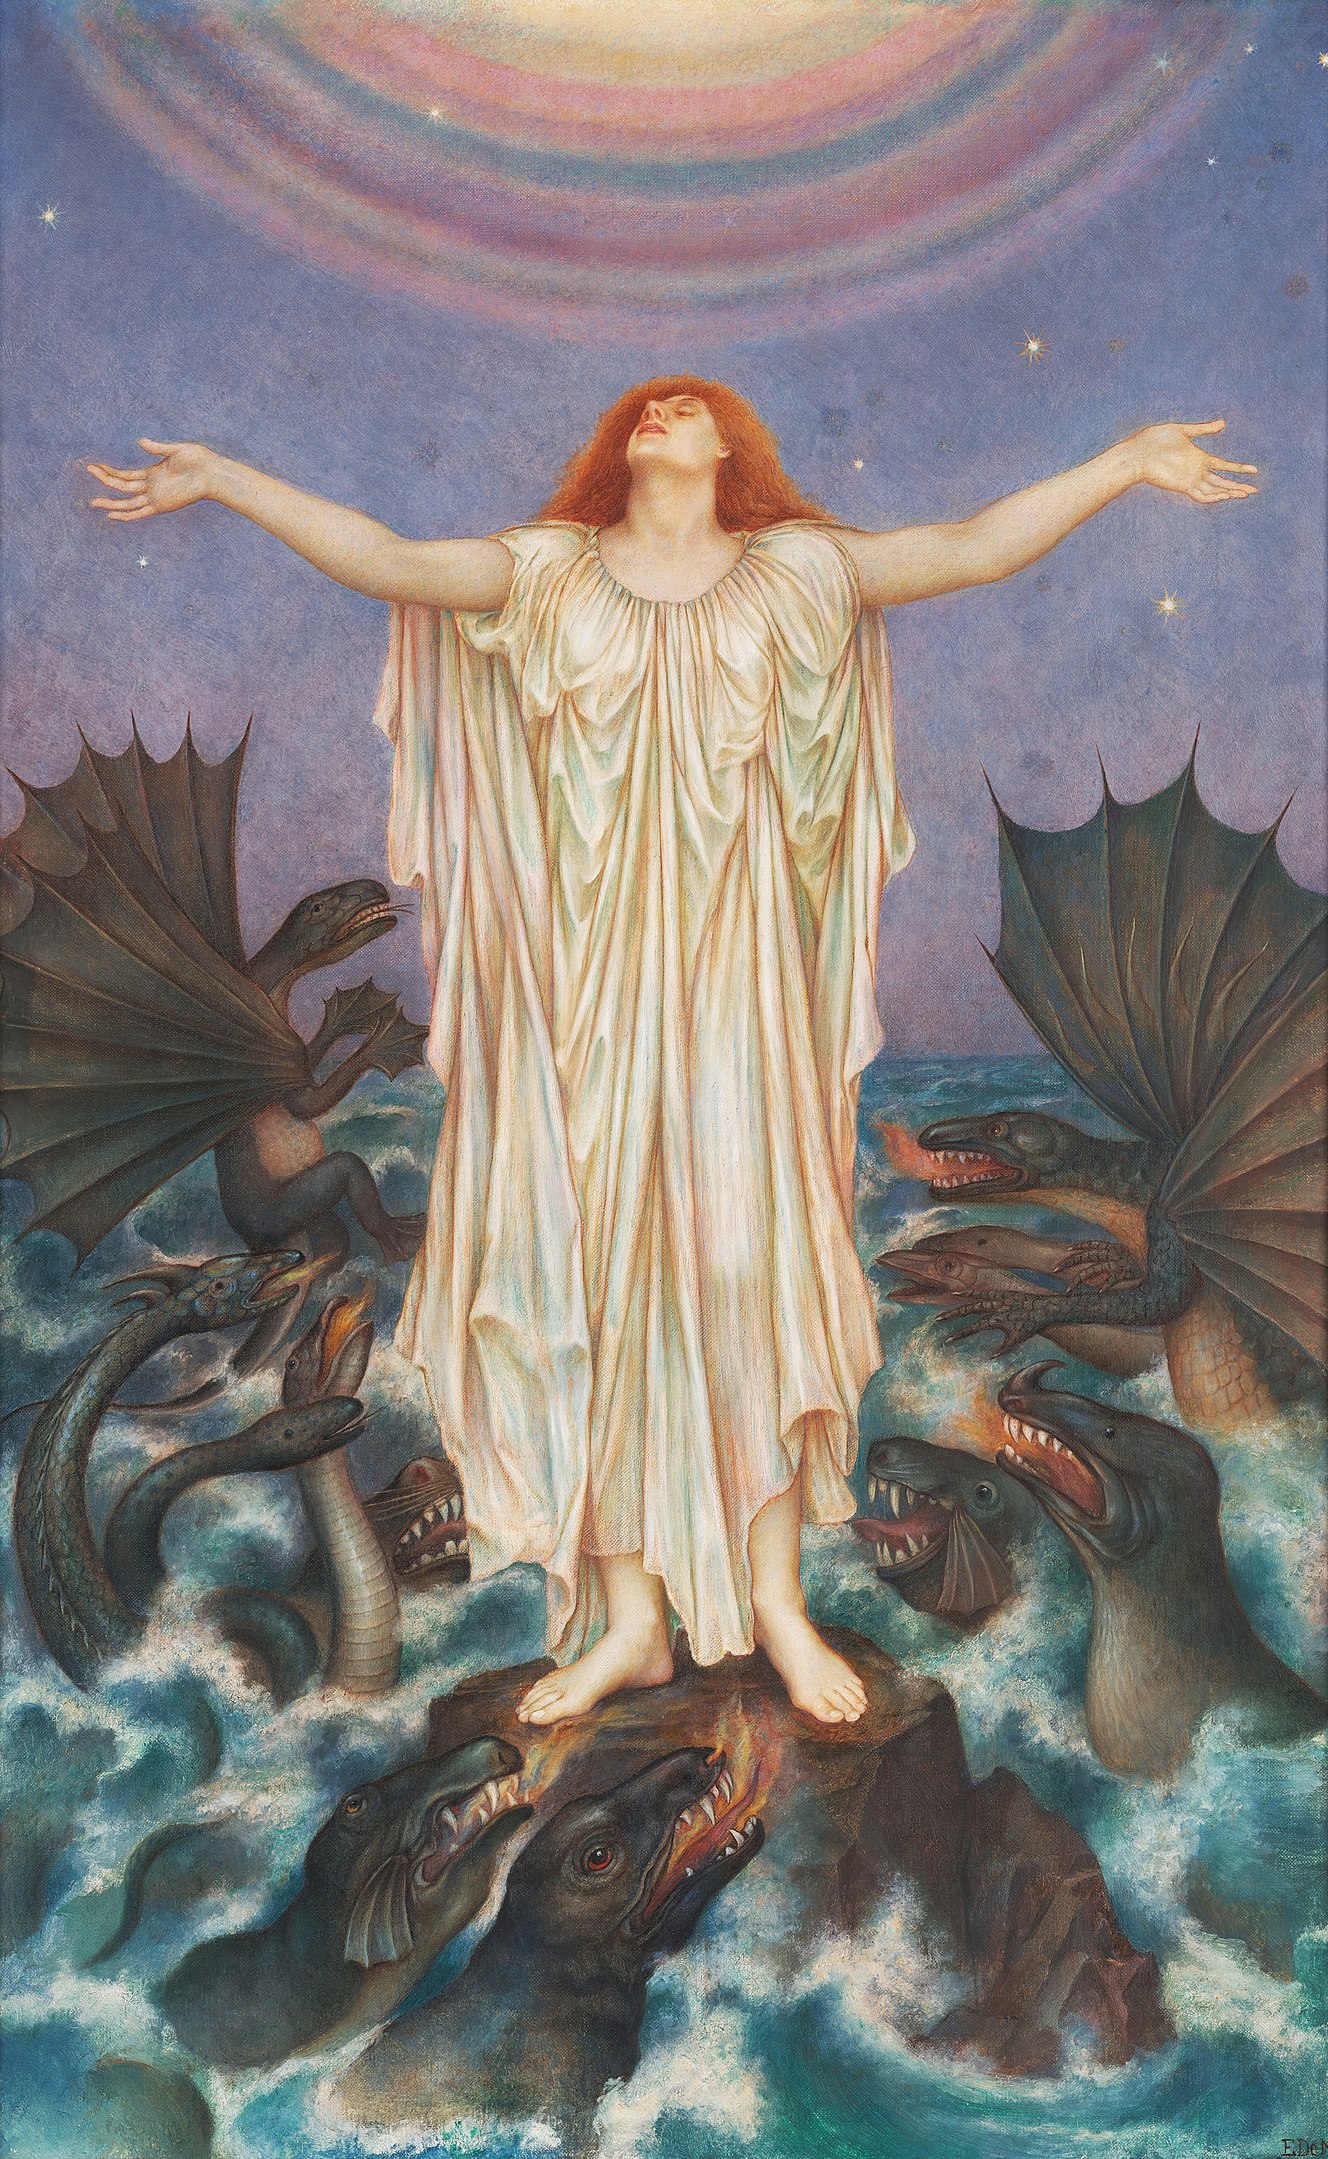 A woman standing on a rock in the sea with her arms outstretched and face tilted towards the sky as sea monsters encircle her